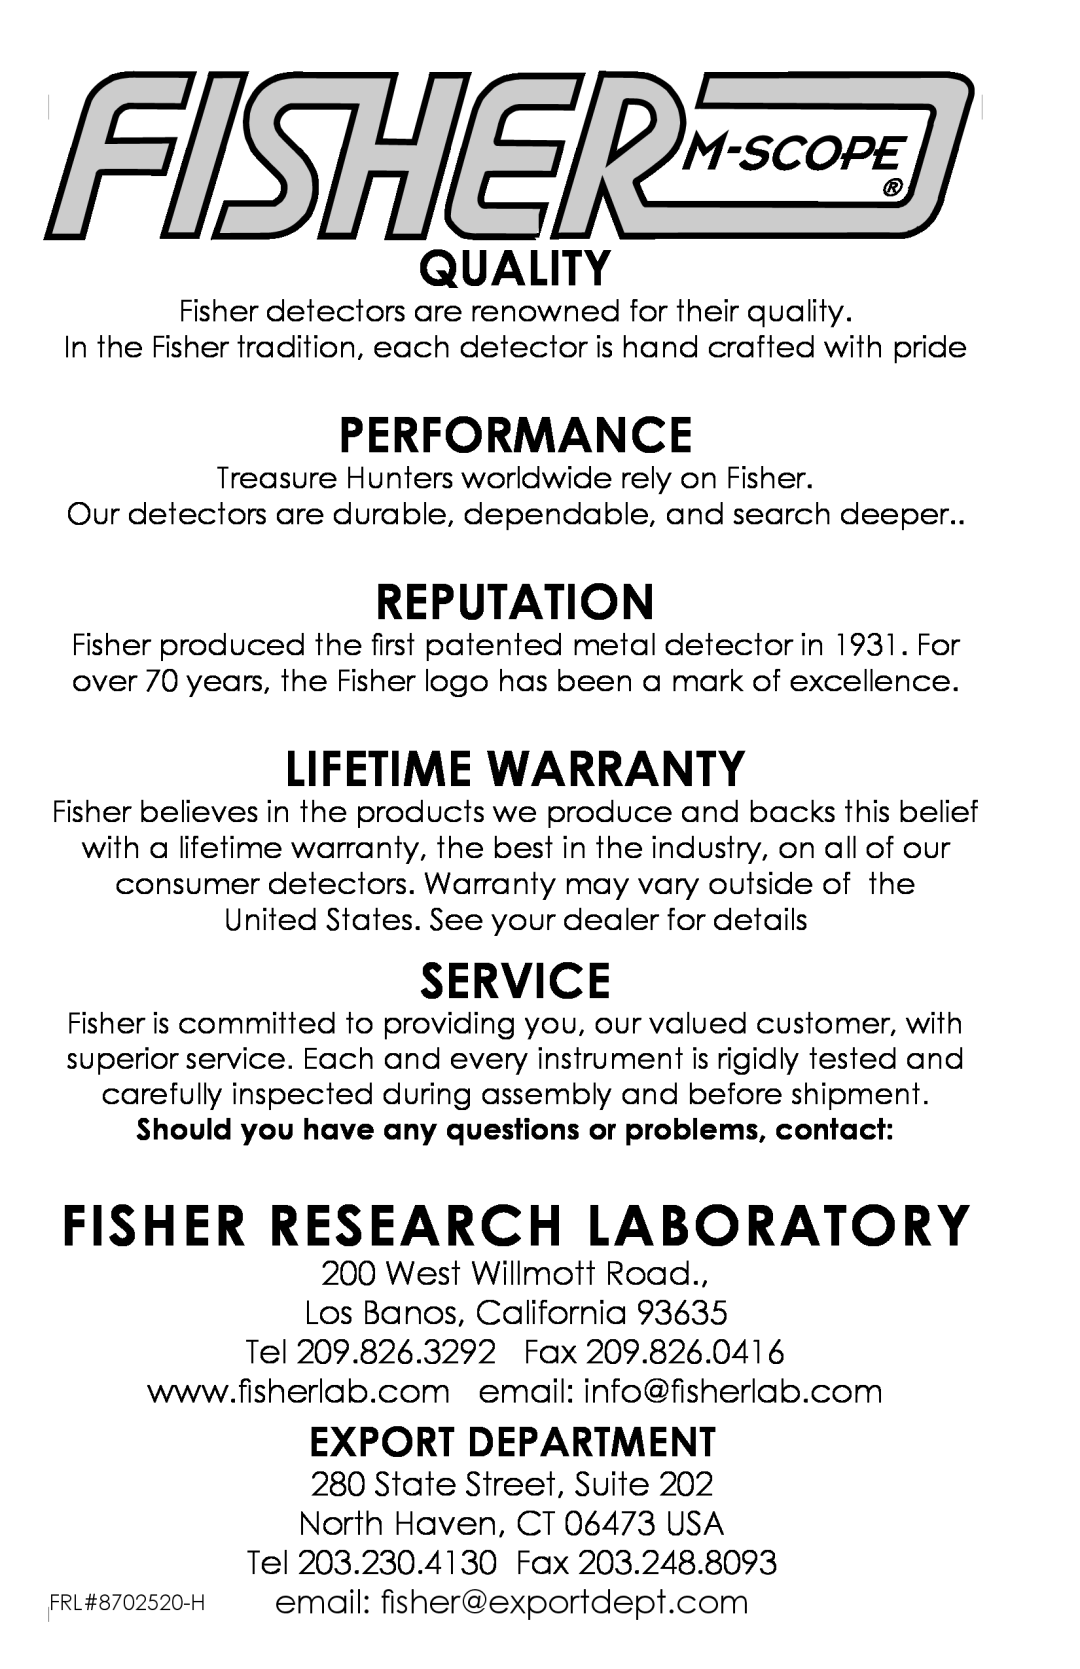 Fisher 1225-X Fisher Research Laboratory, Quality, Performance, Reputation, Lifetime Warranty, Service, Export Department 